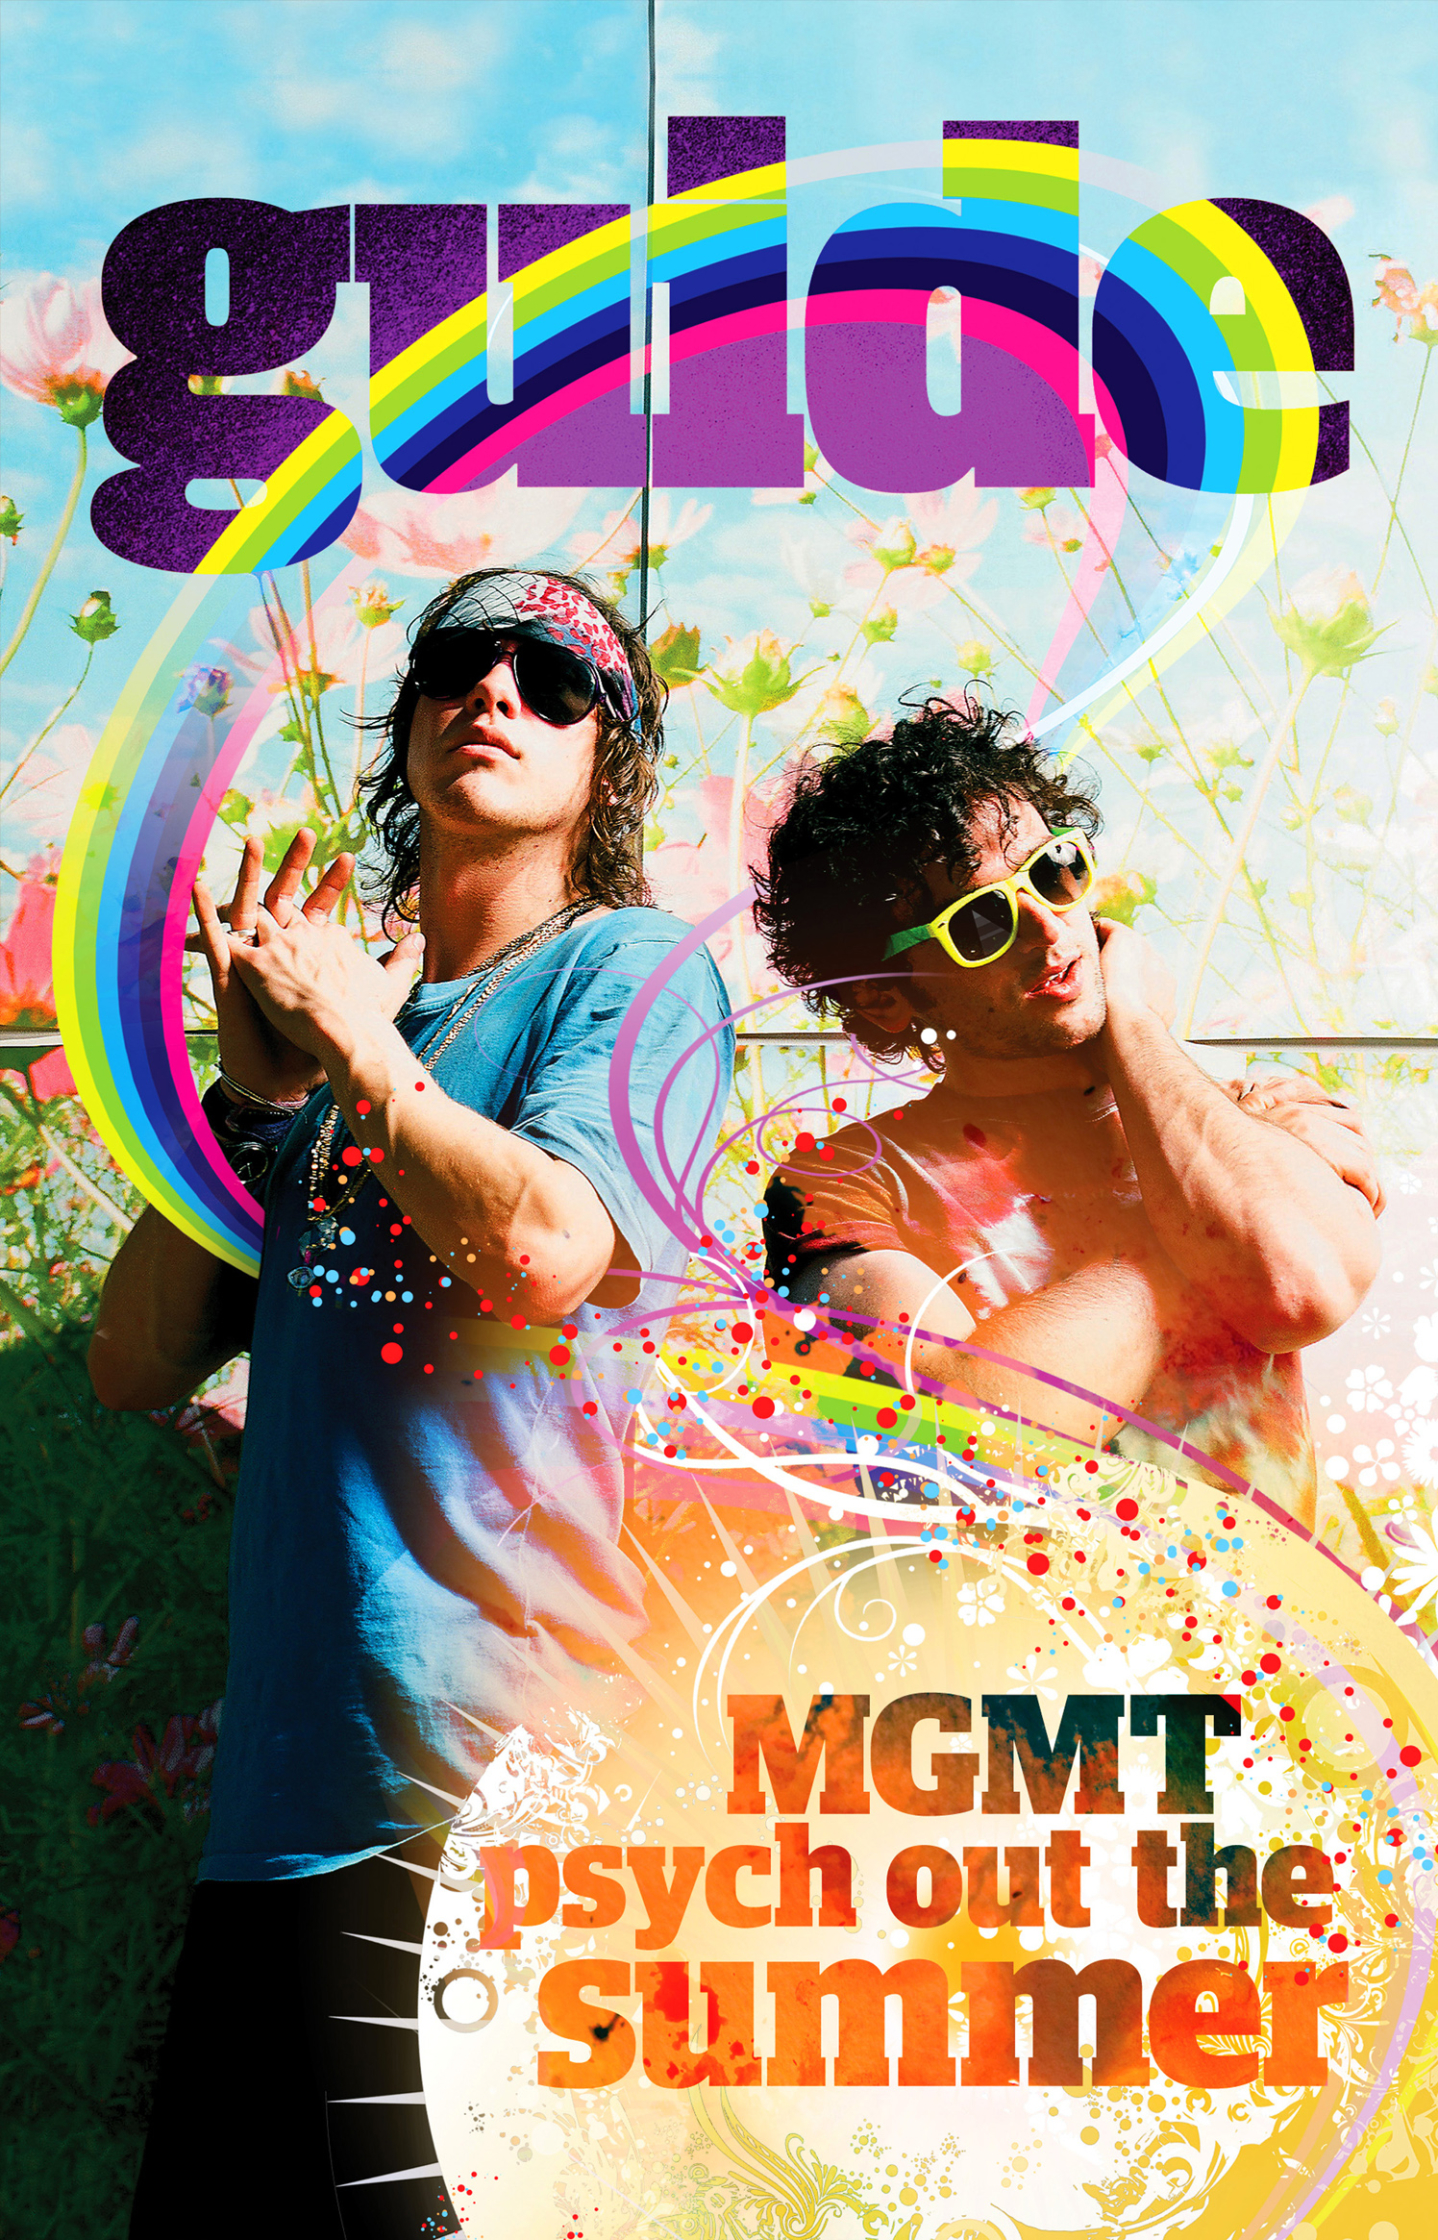 MGMT The Guide Front Cover